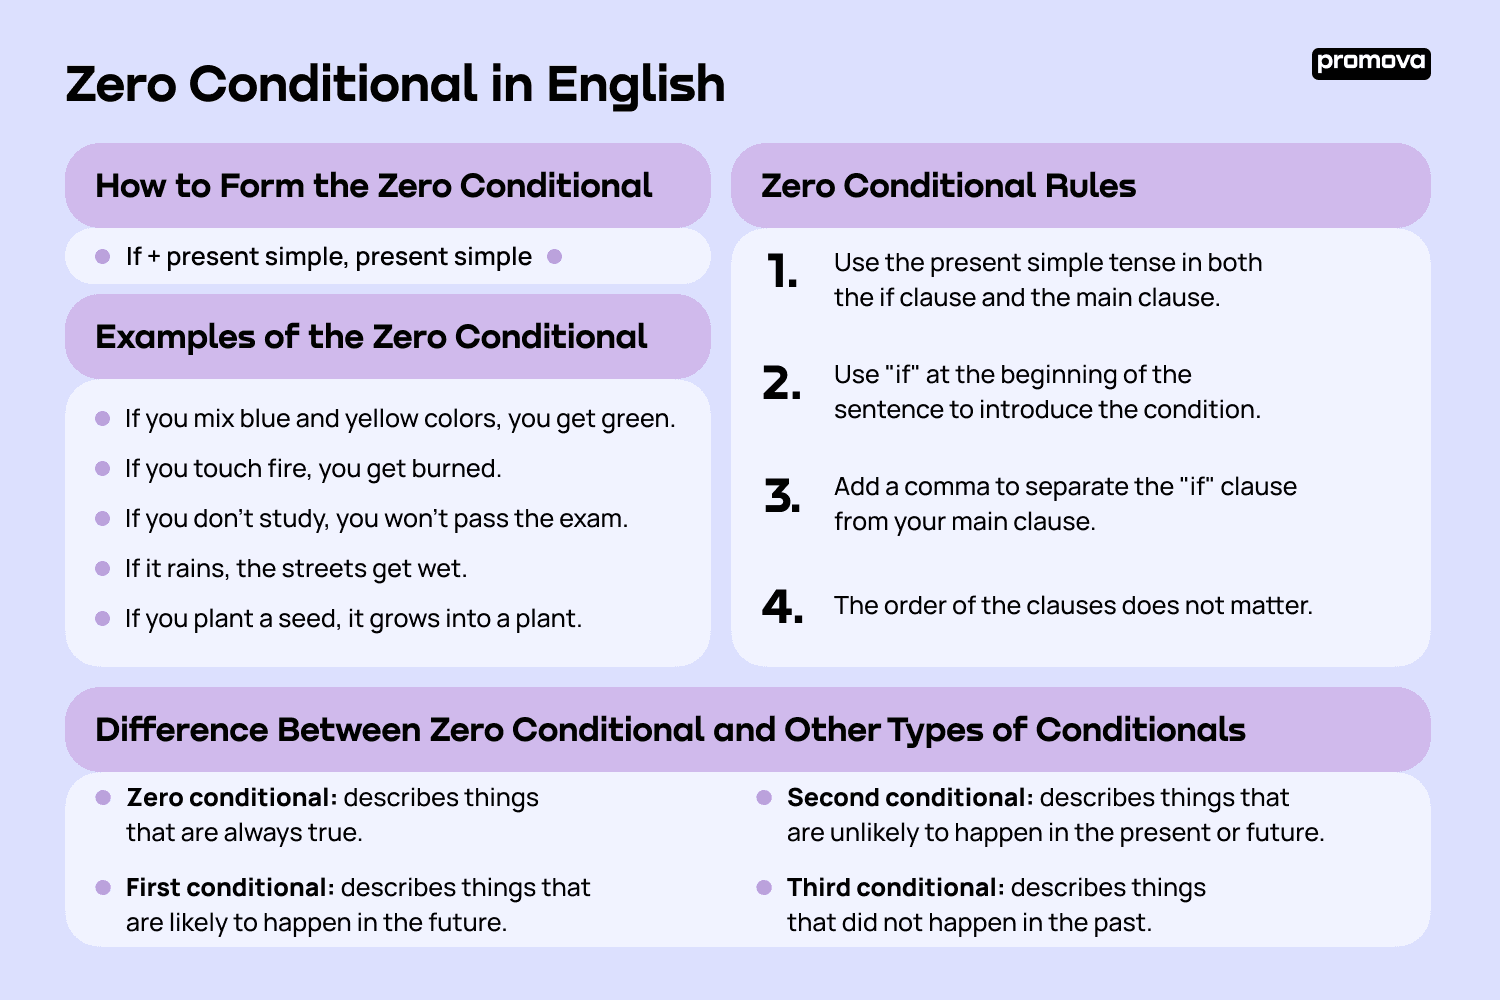 How to Form the Zero Conditional